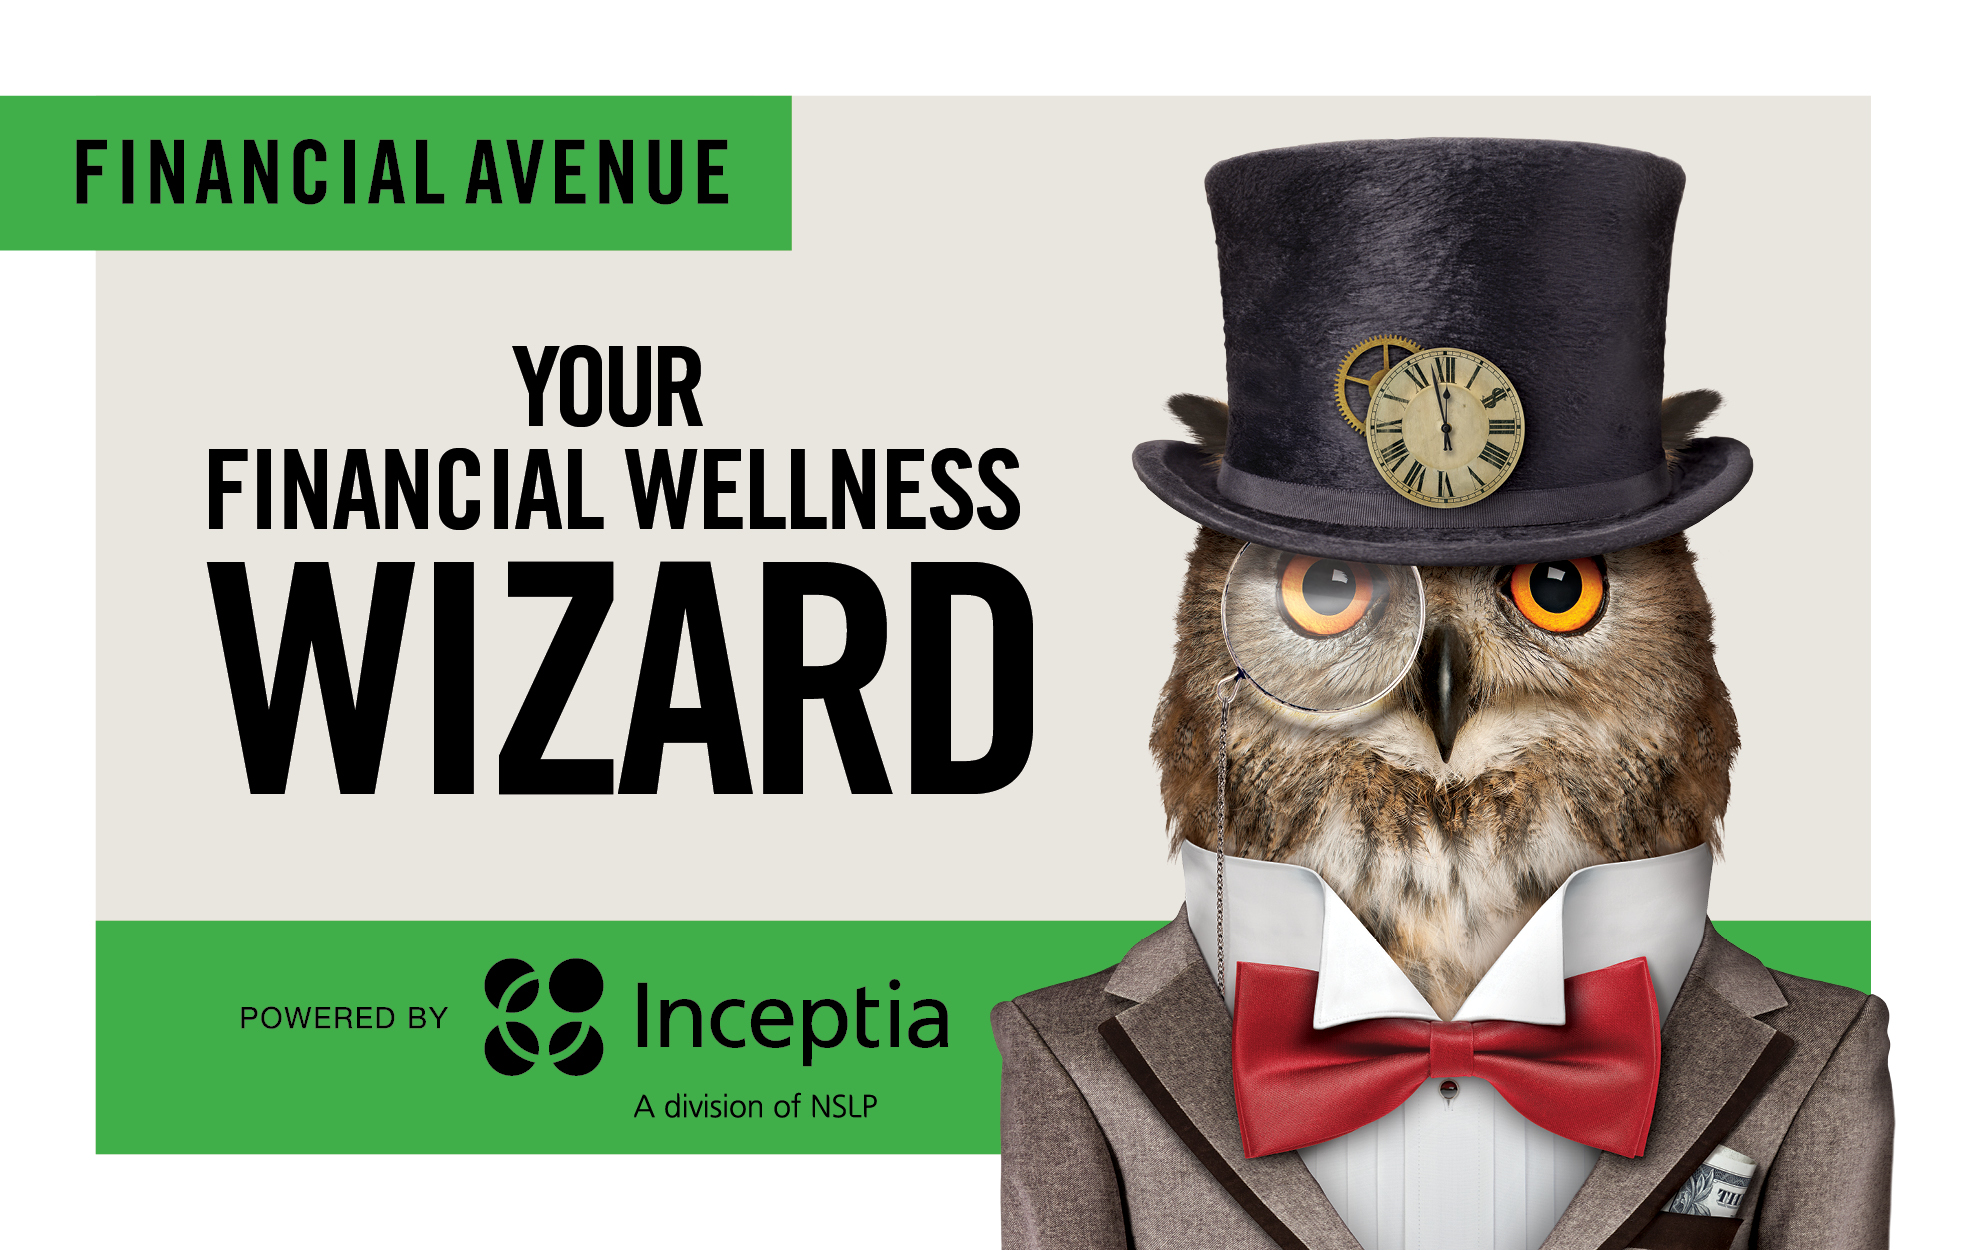 wizard card for financial avenue